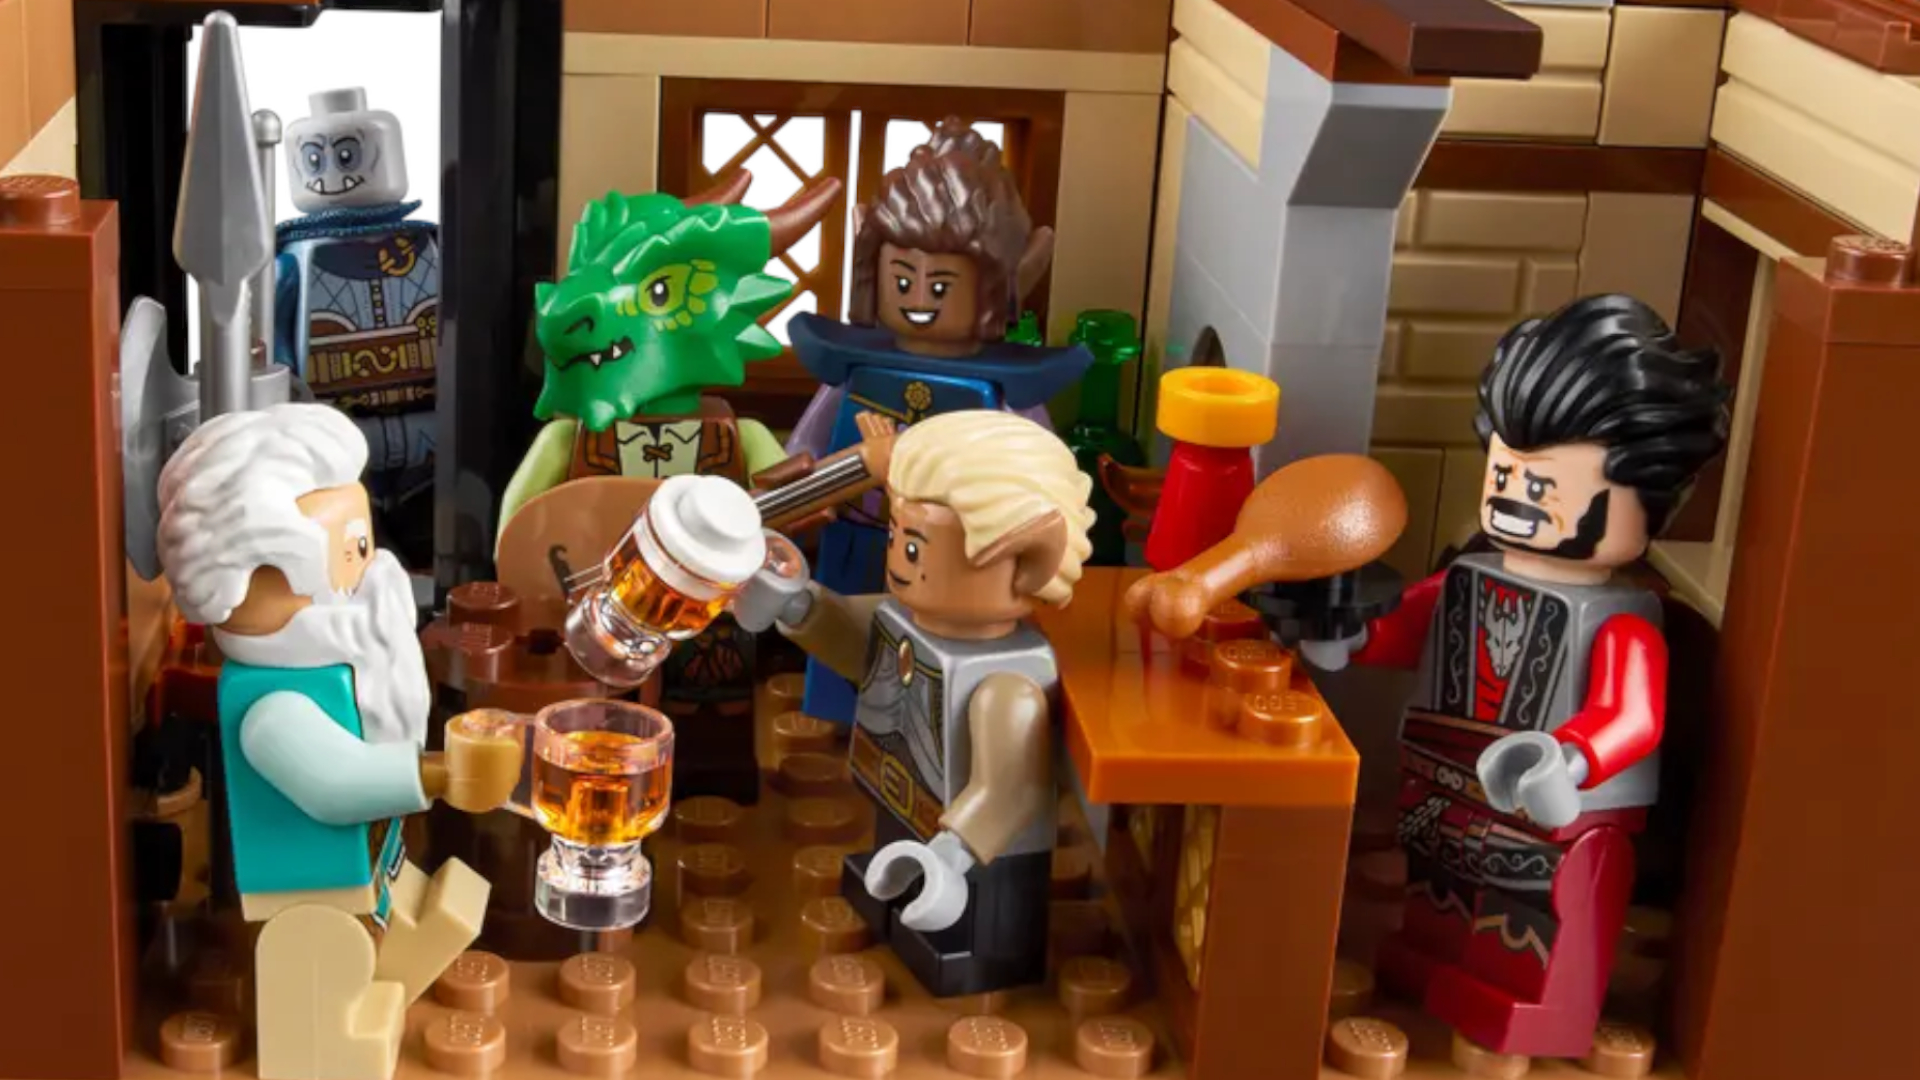 Lego minifigures in the tavern section of the set